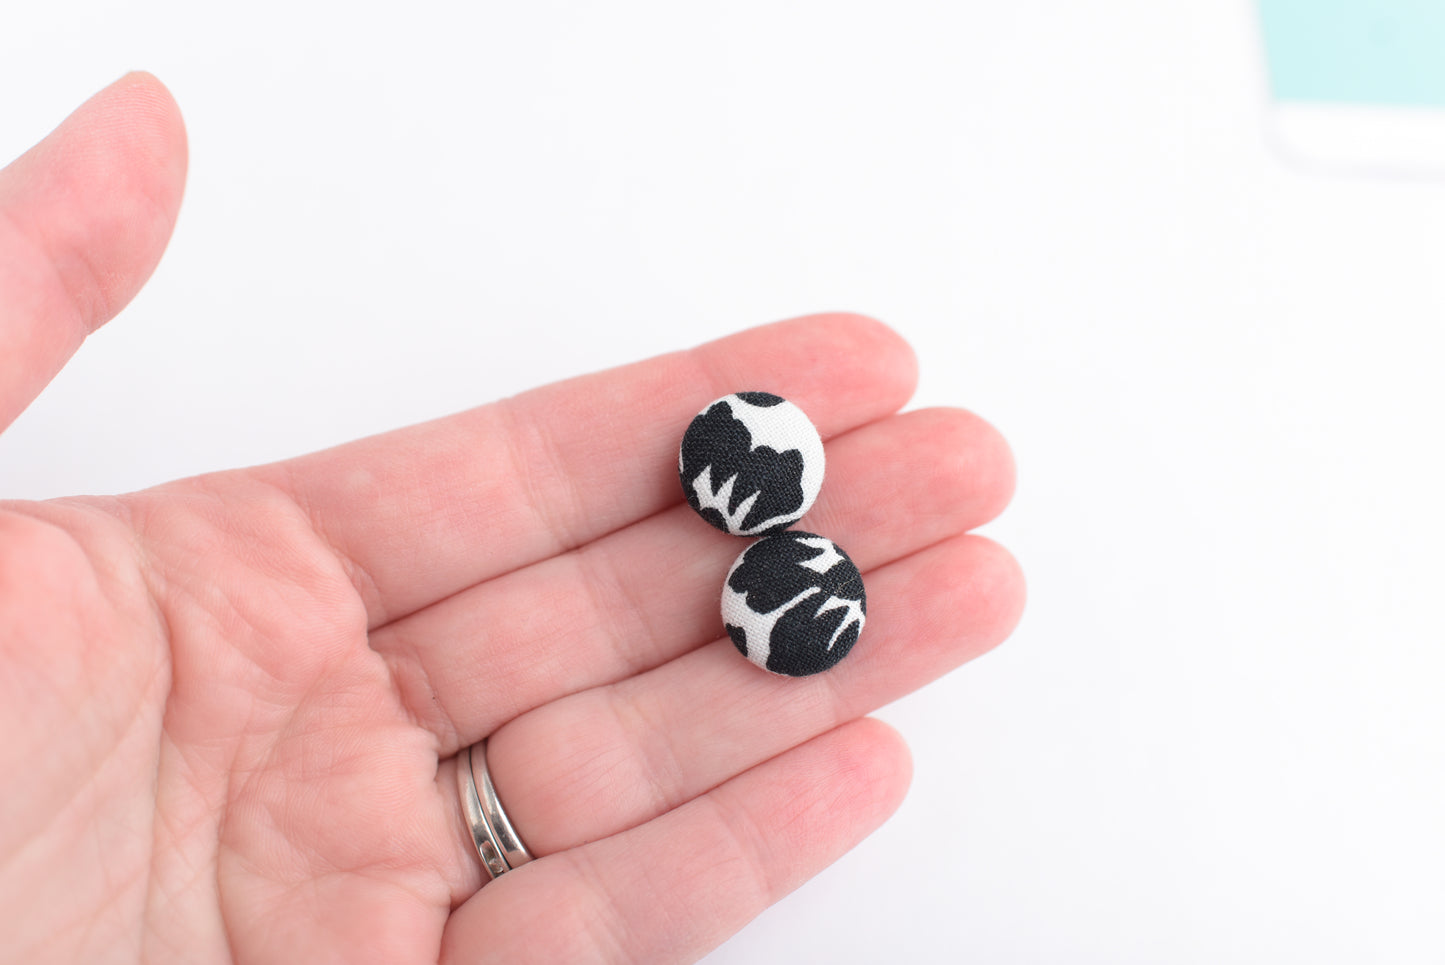 Black and White Damask Fabric Button Earrings with Titanium Posts